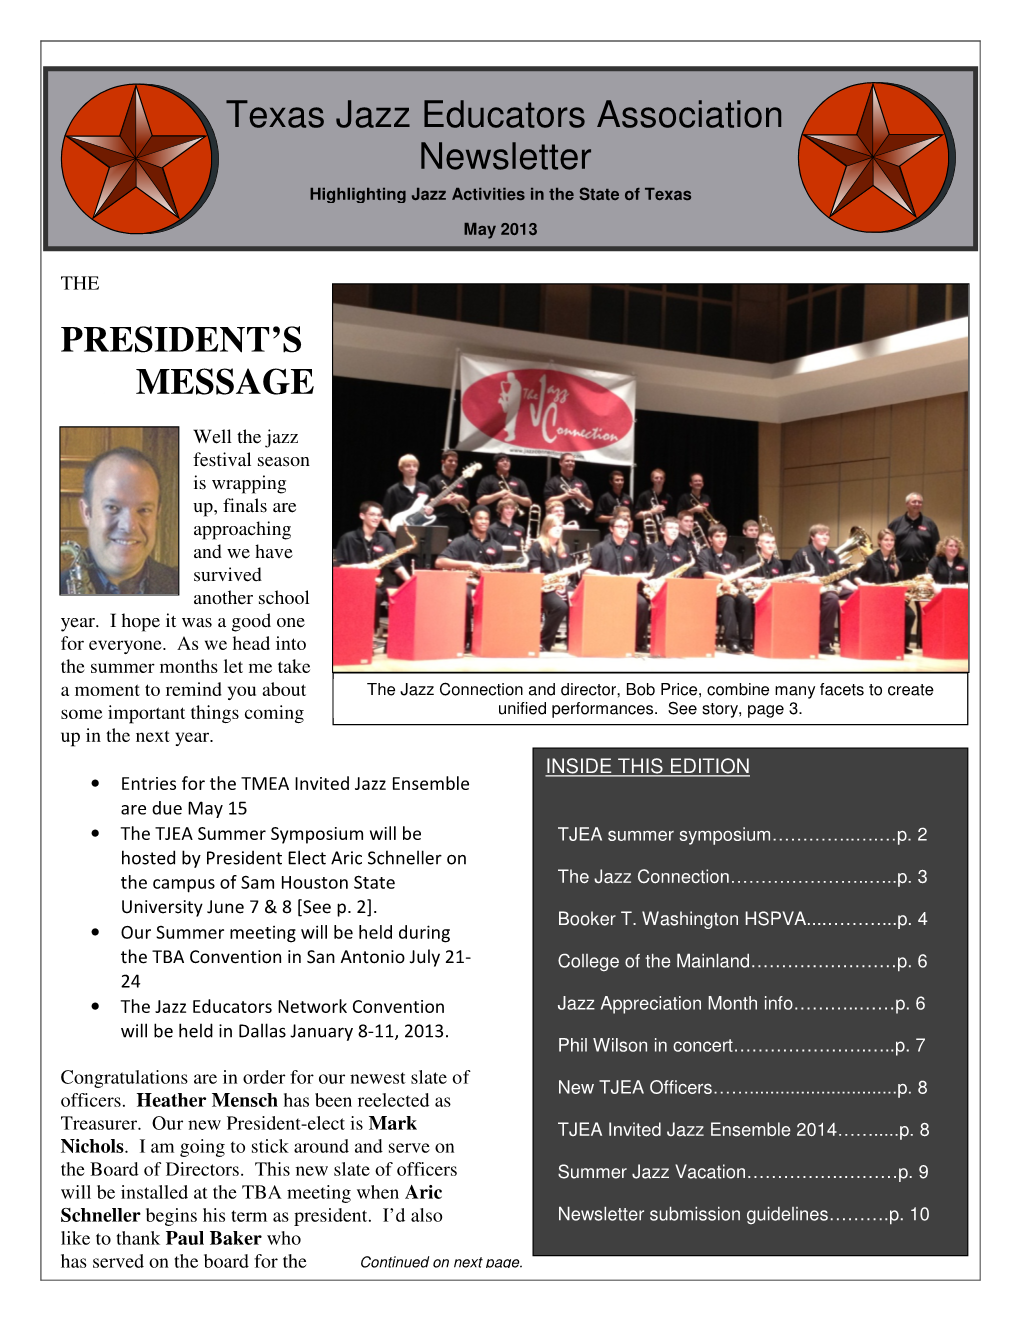 May 2013 Newsletter